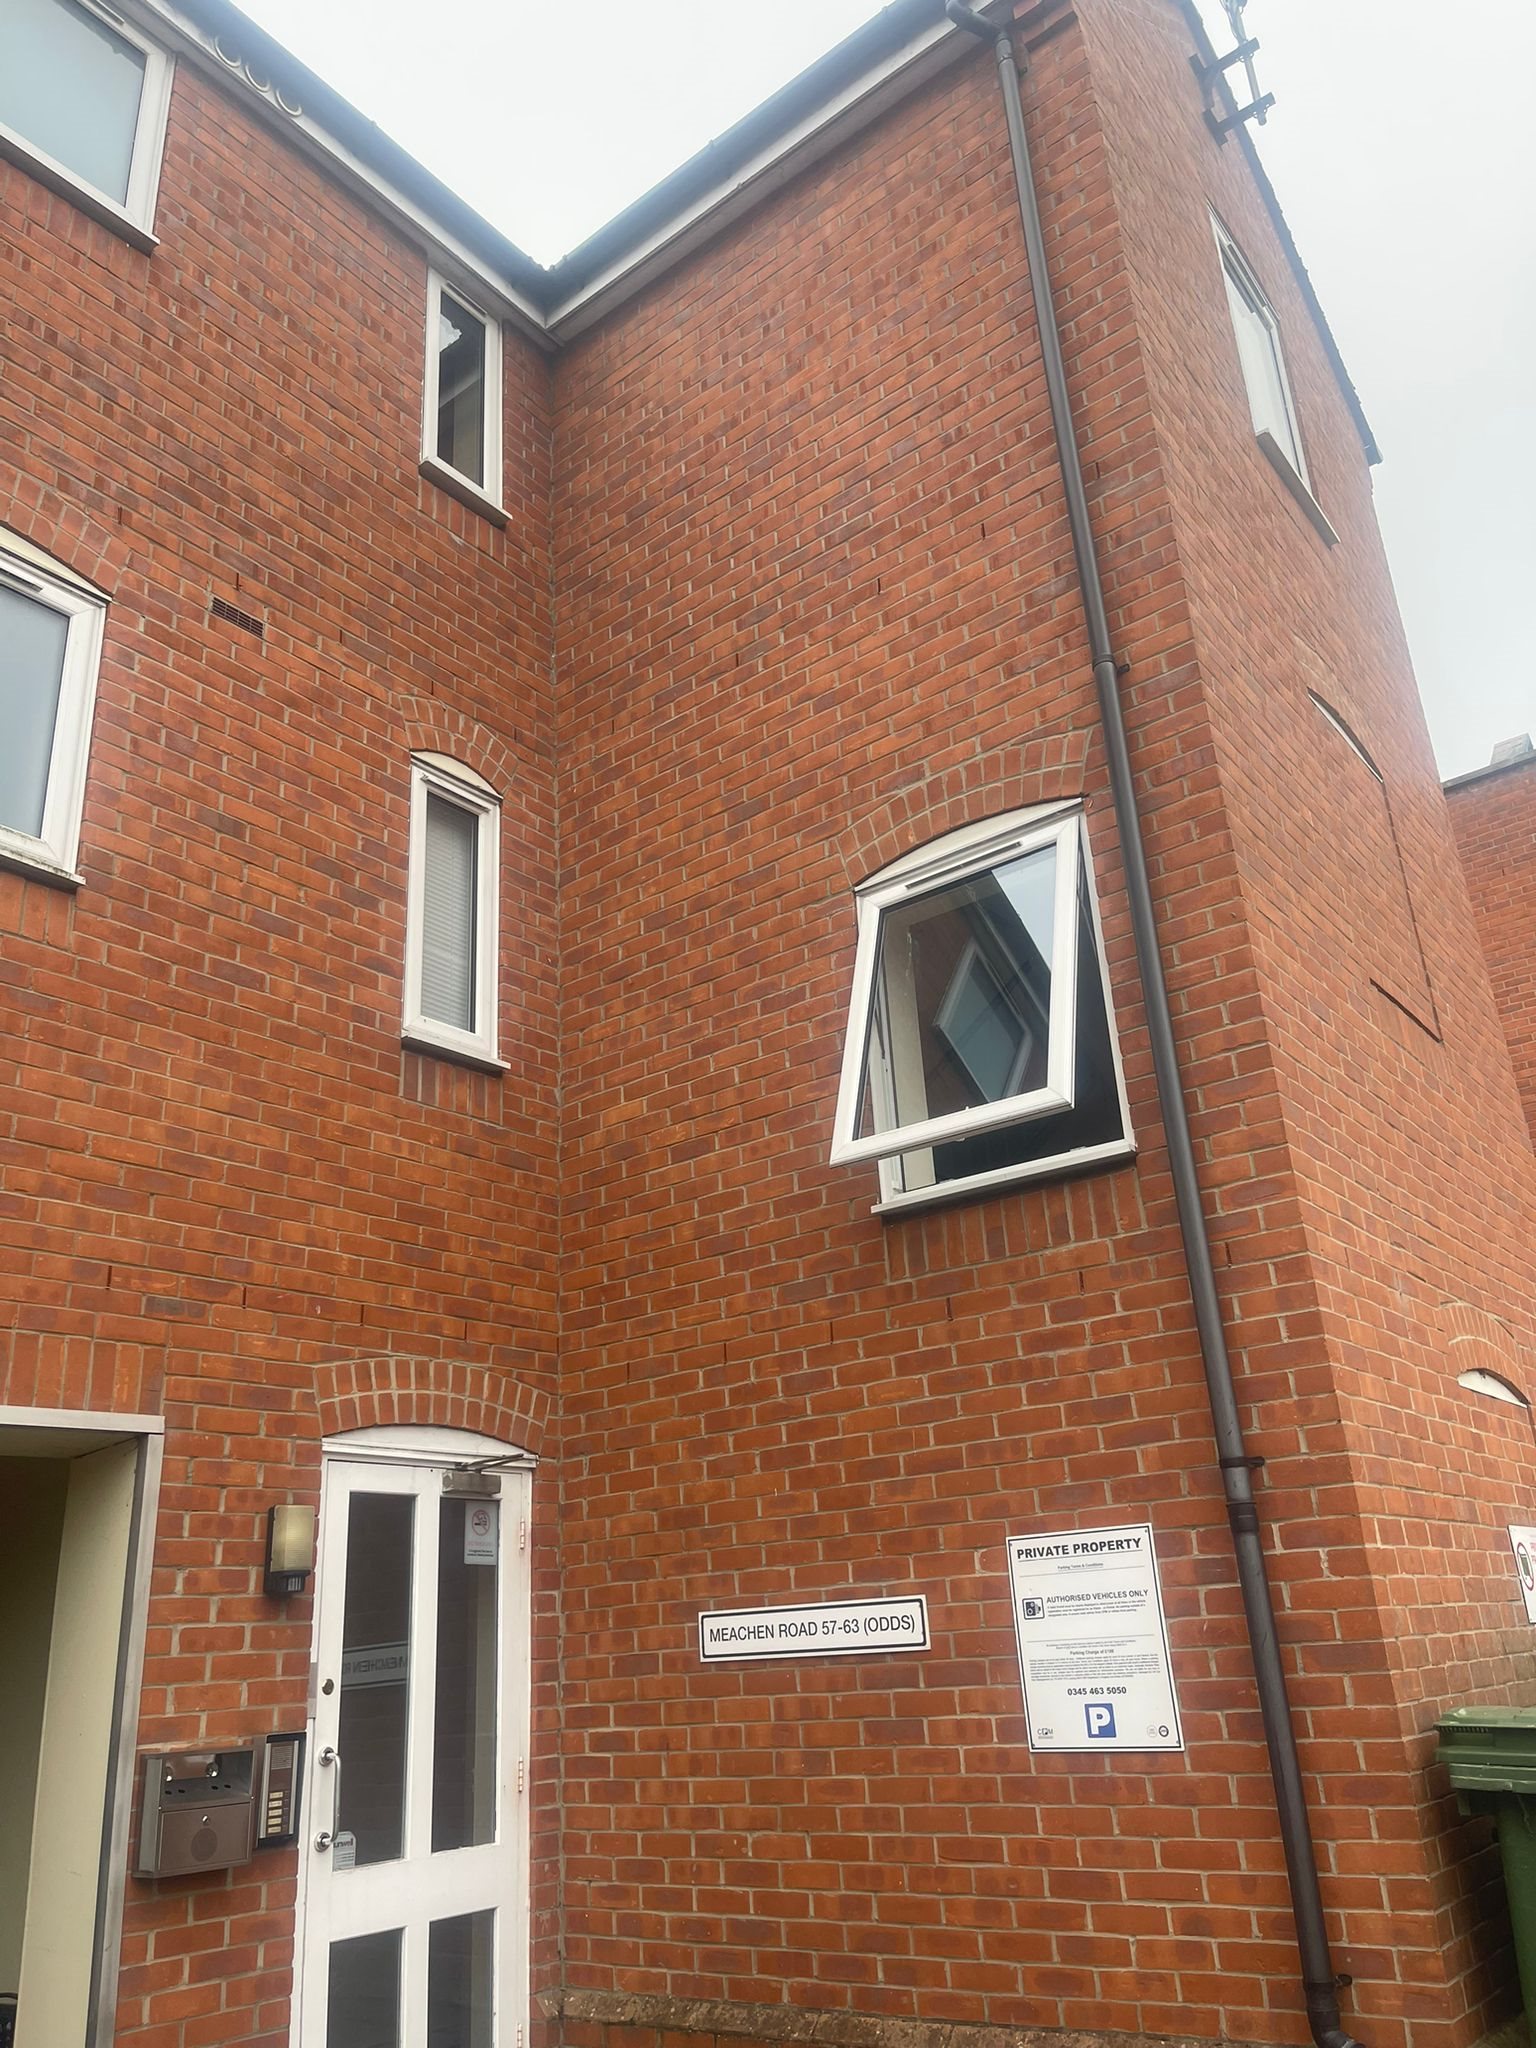 2 bed flat to rent in Meachen Road, Colchester - Property Image 1